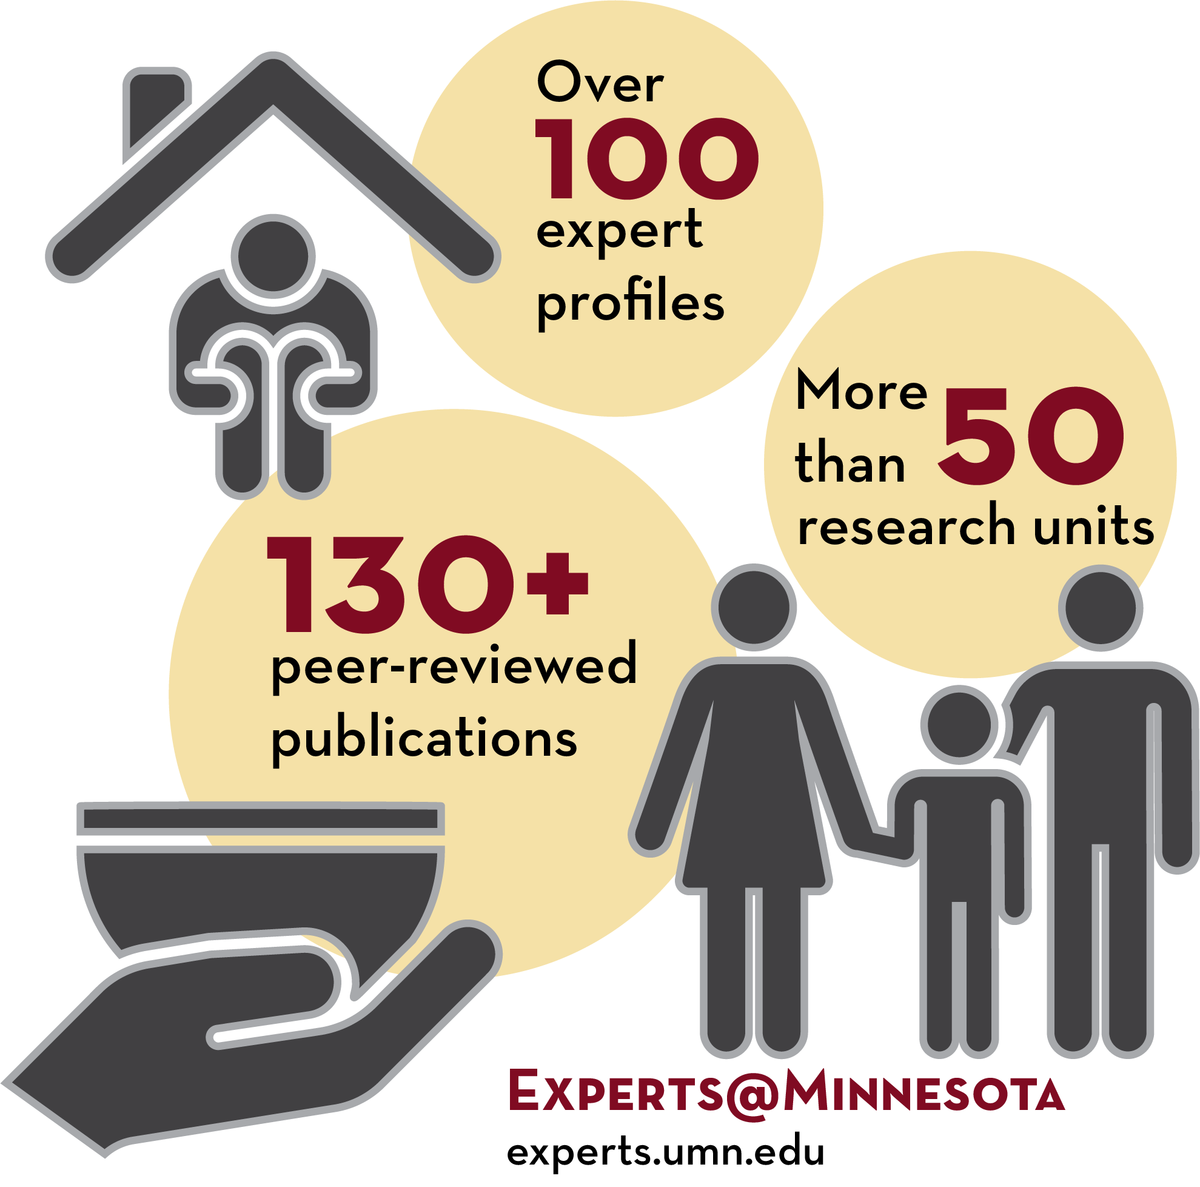 SDG 1 Experts Infographic. Over 100 expert profiles, More Than 50 research units, 130+ peer reviewed publications. 